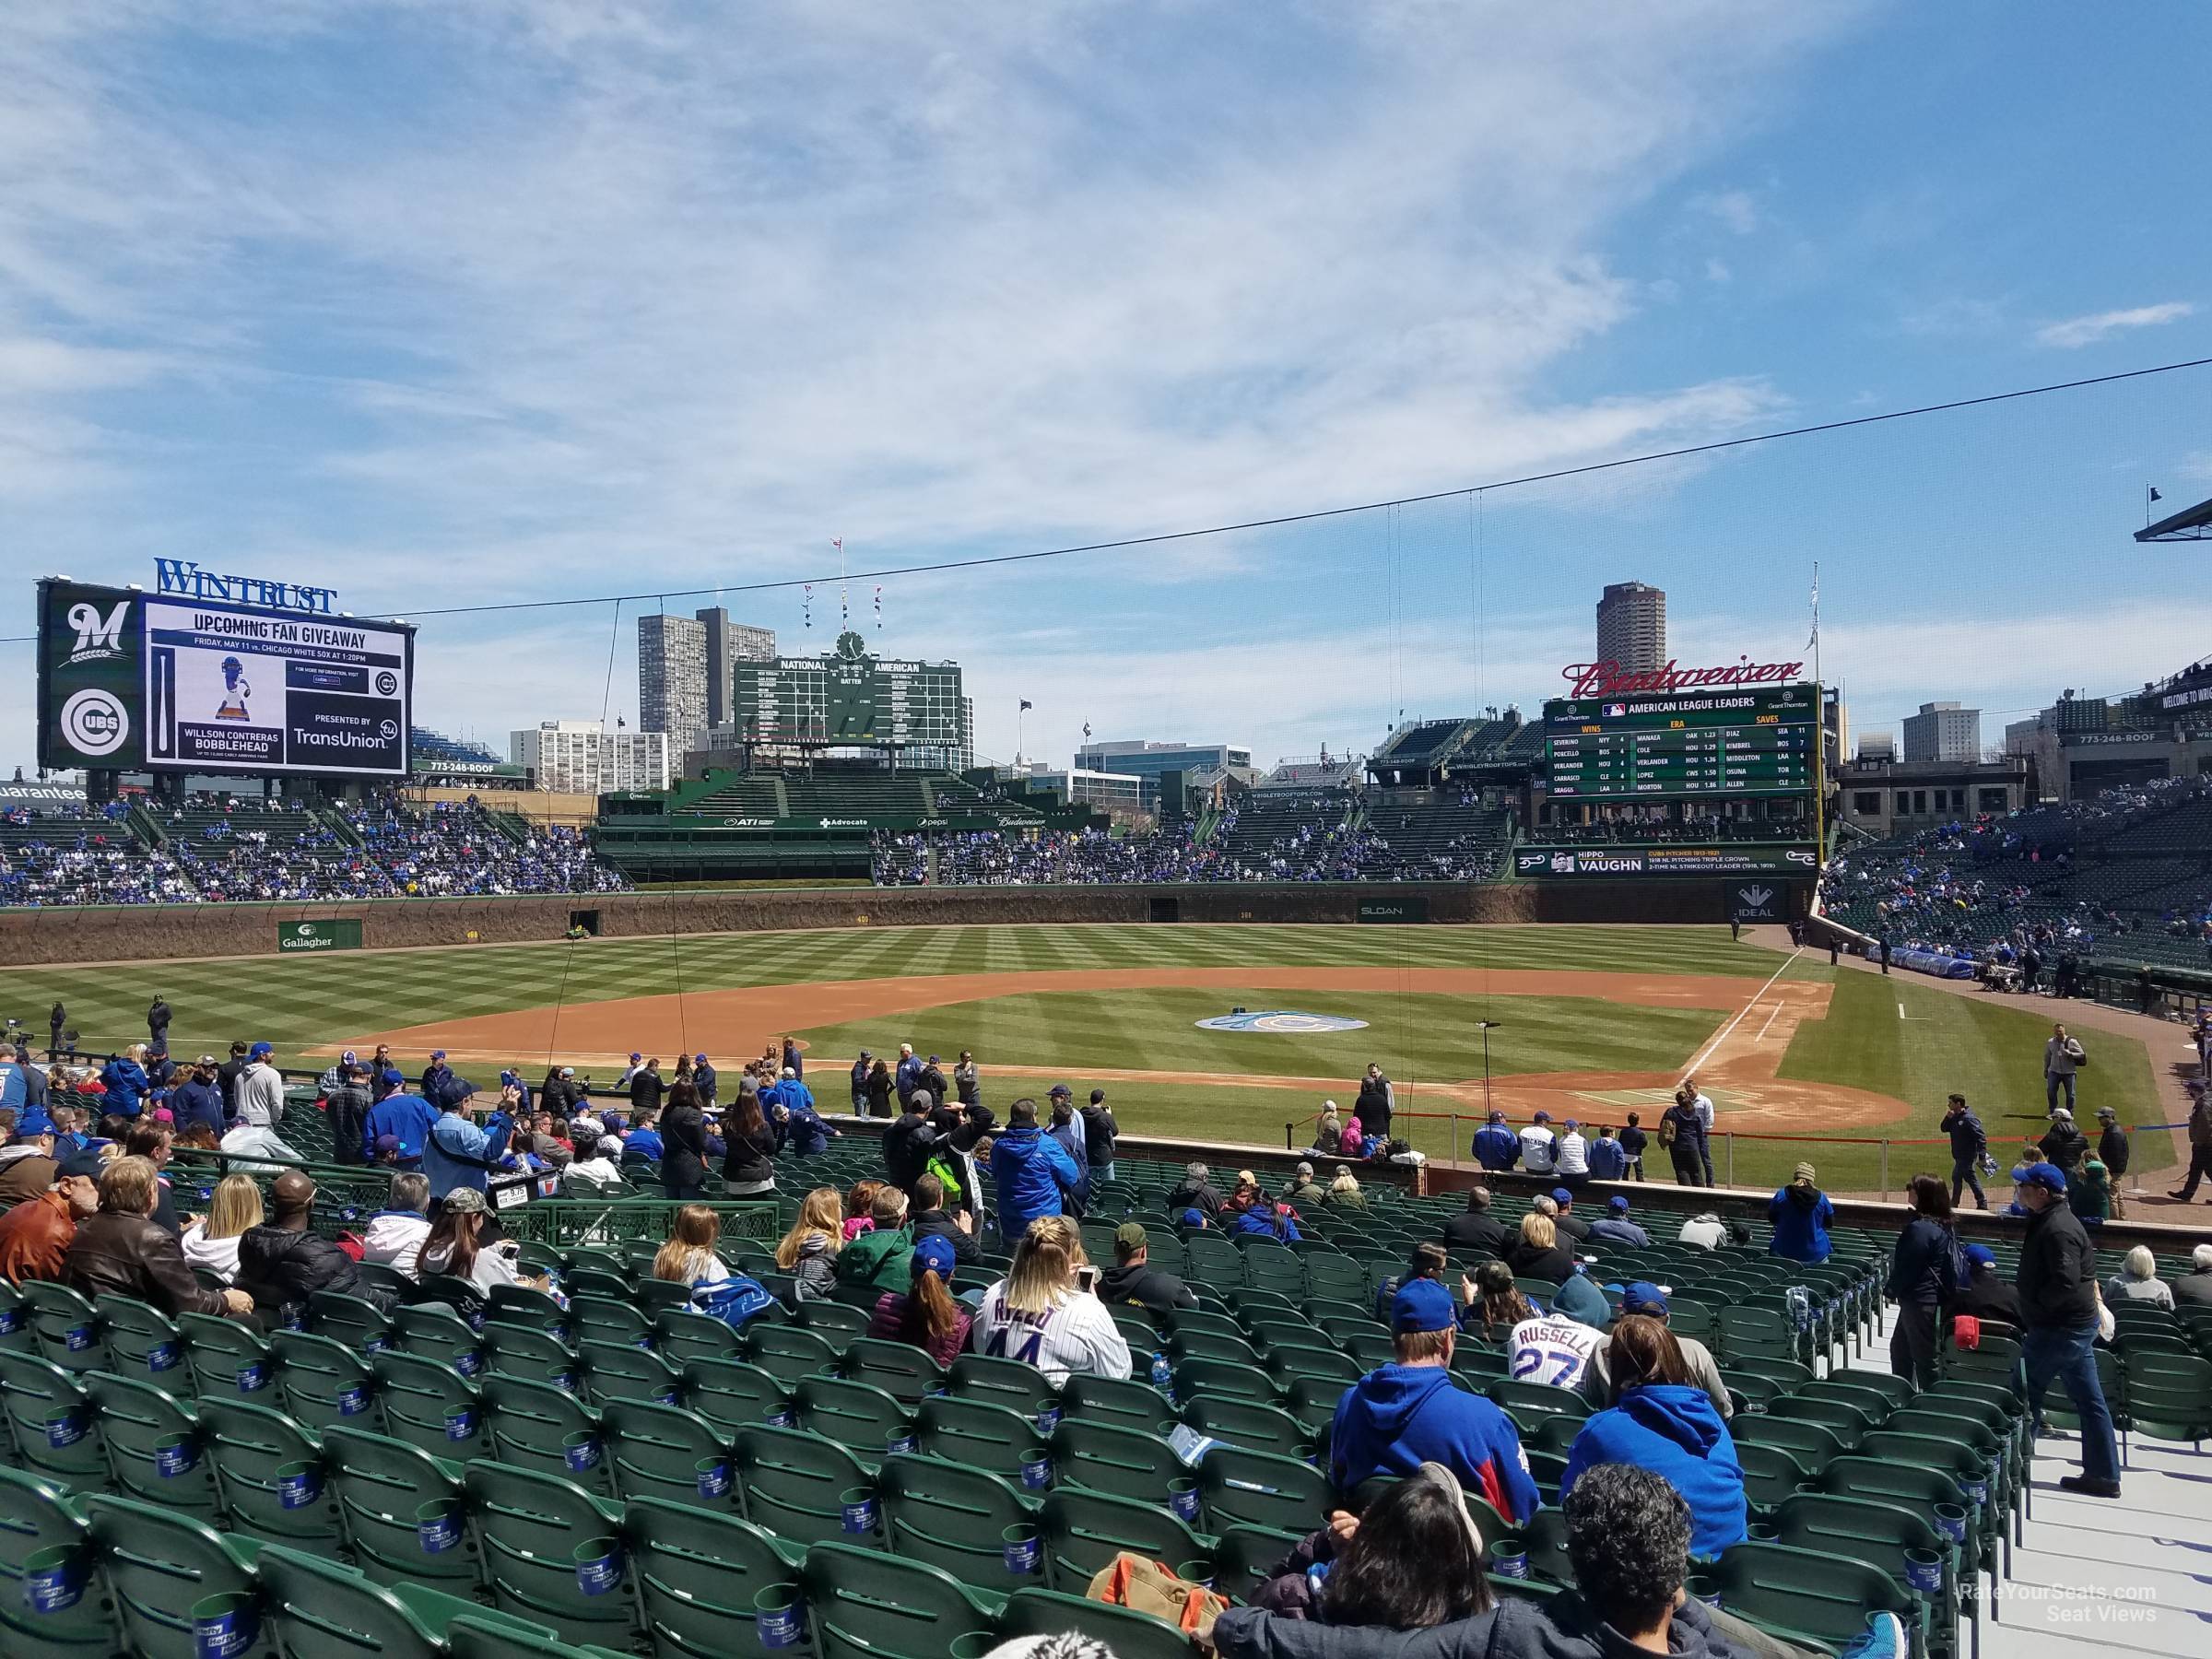 Section 117 at Wrigley Field 